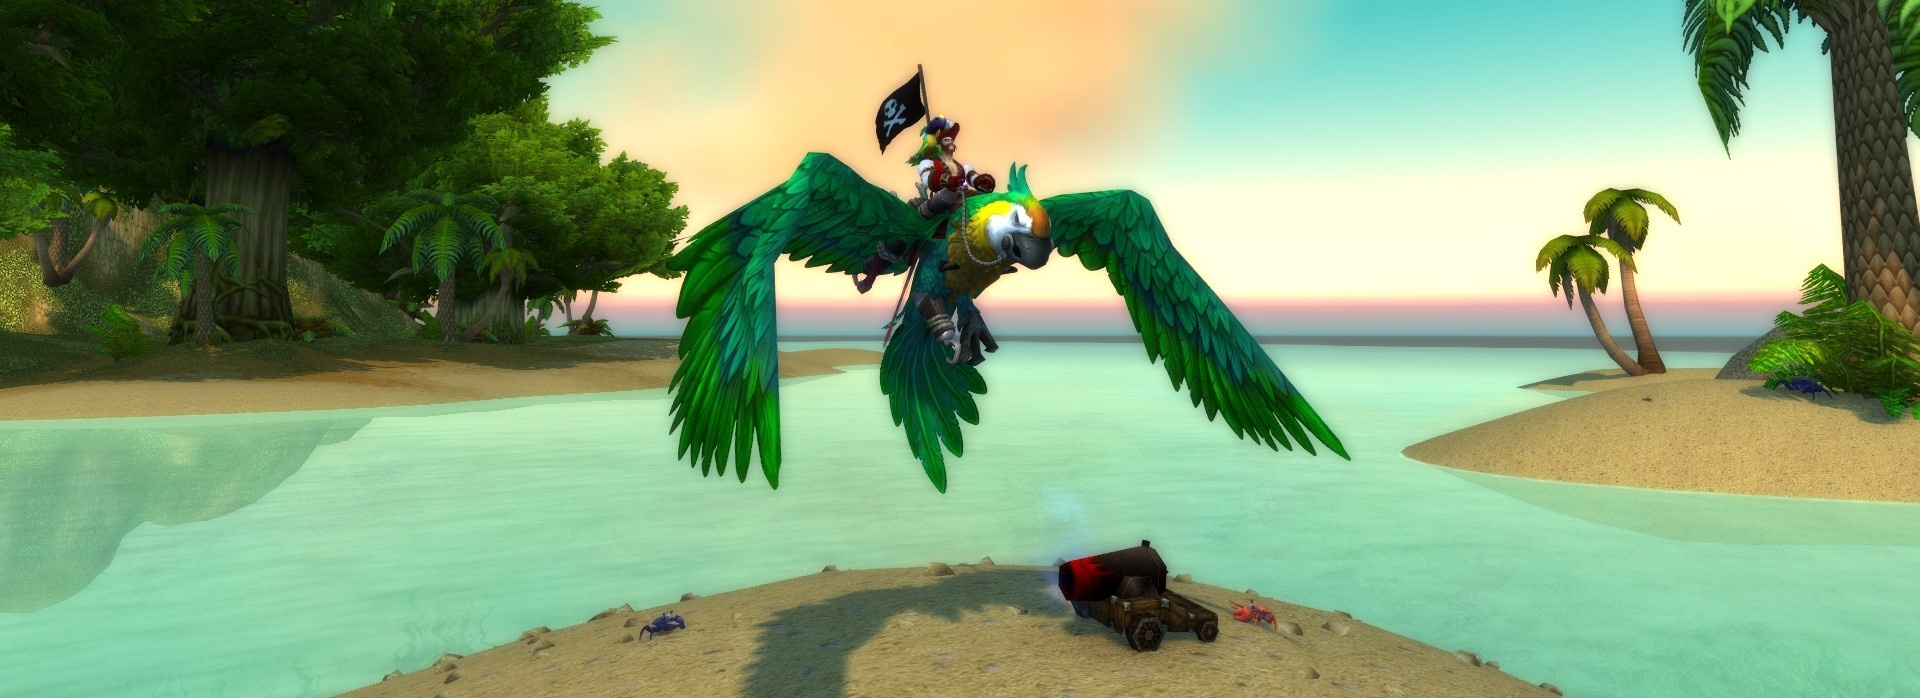 Pirate's Day Transmog Guide by Hidden Azeroth Wowhead News